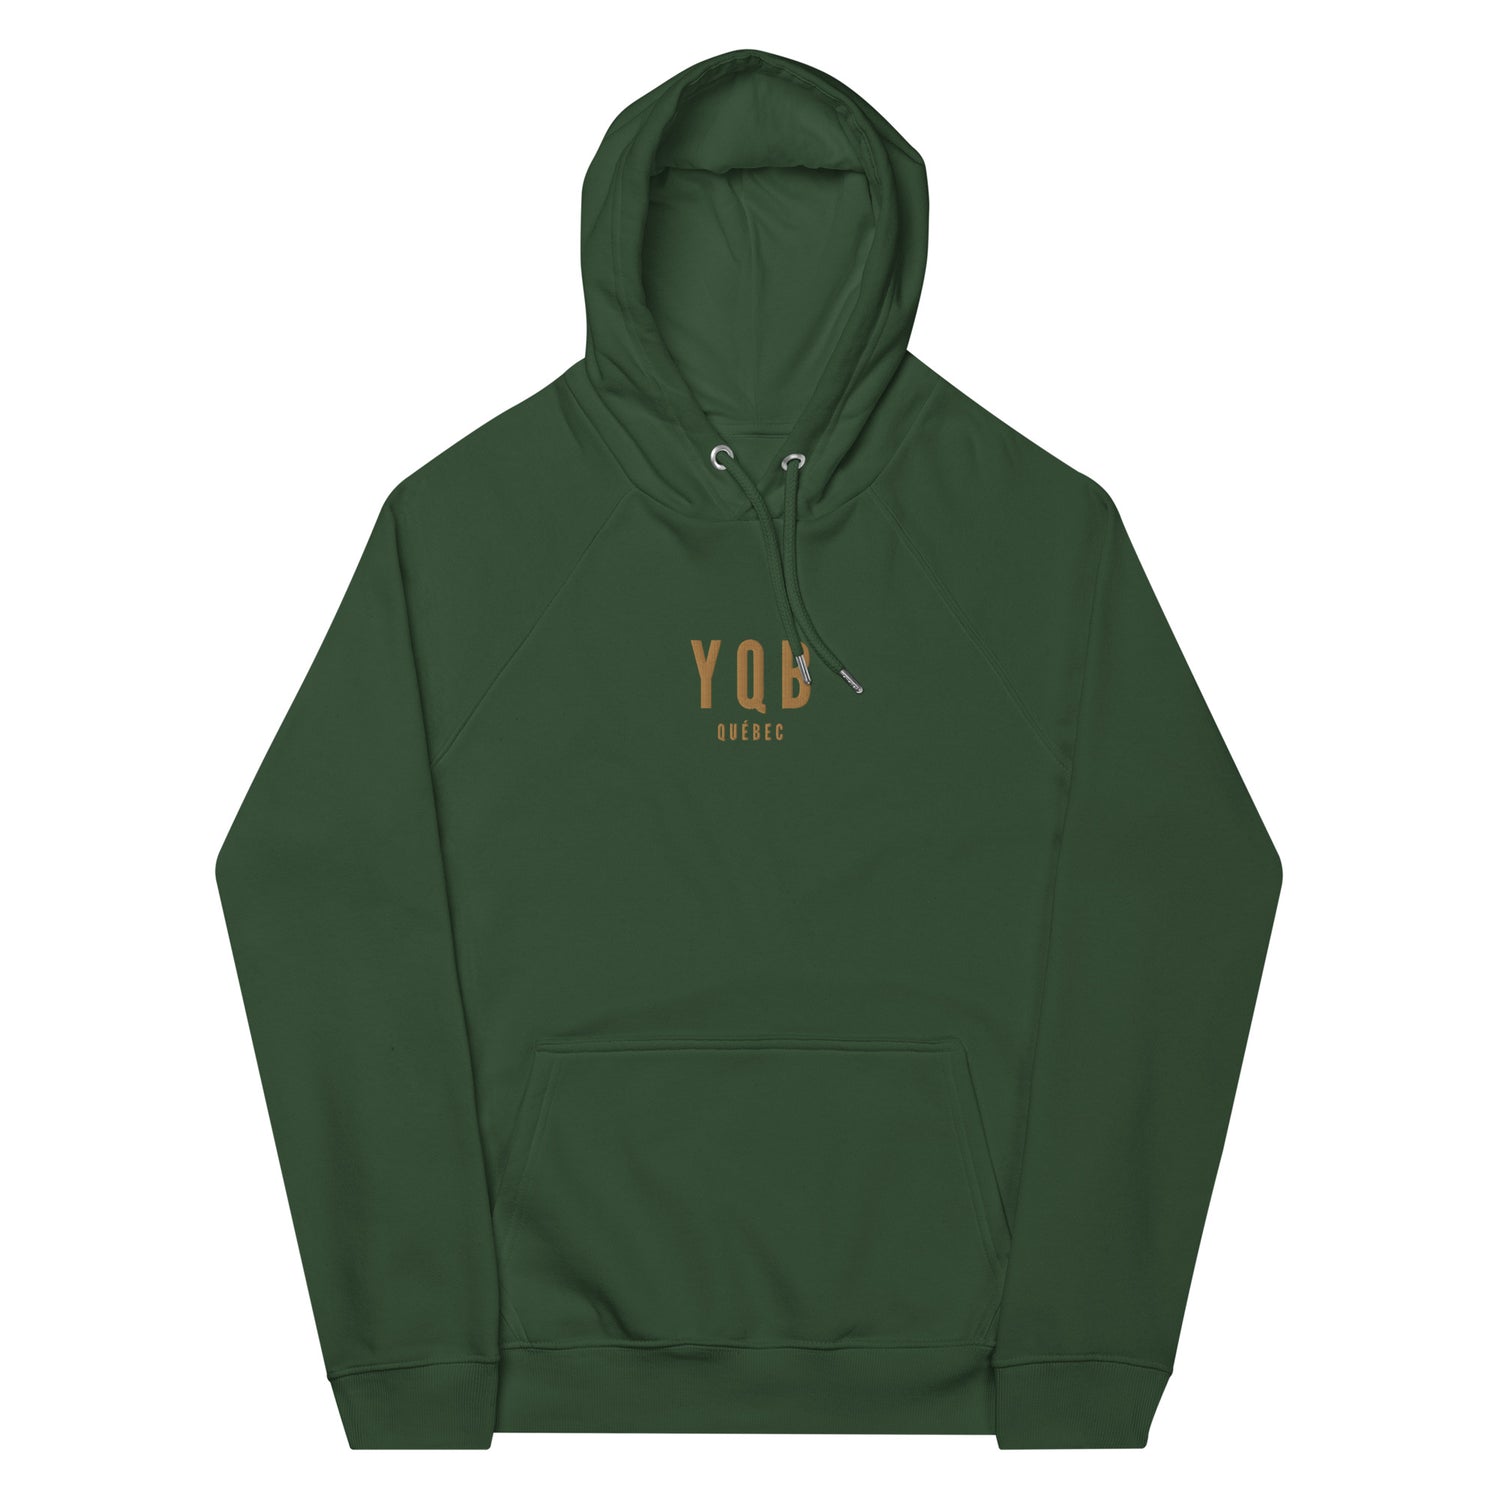 Quebec City Quebec Hoodies and Sweatshirts • YQB Airport Code